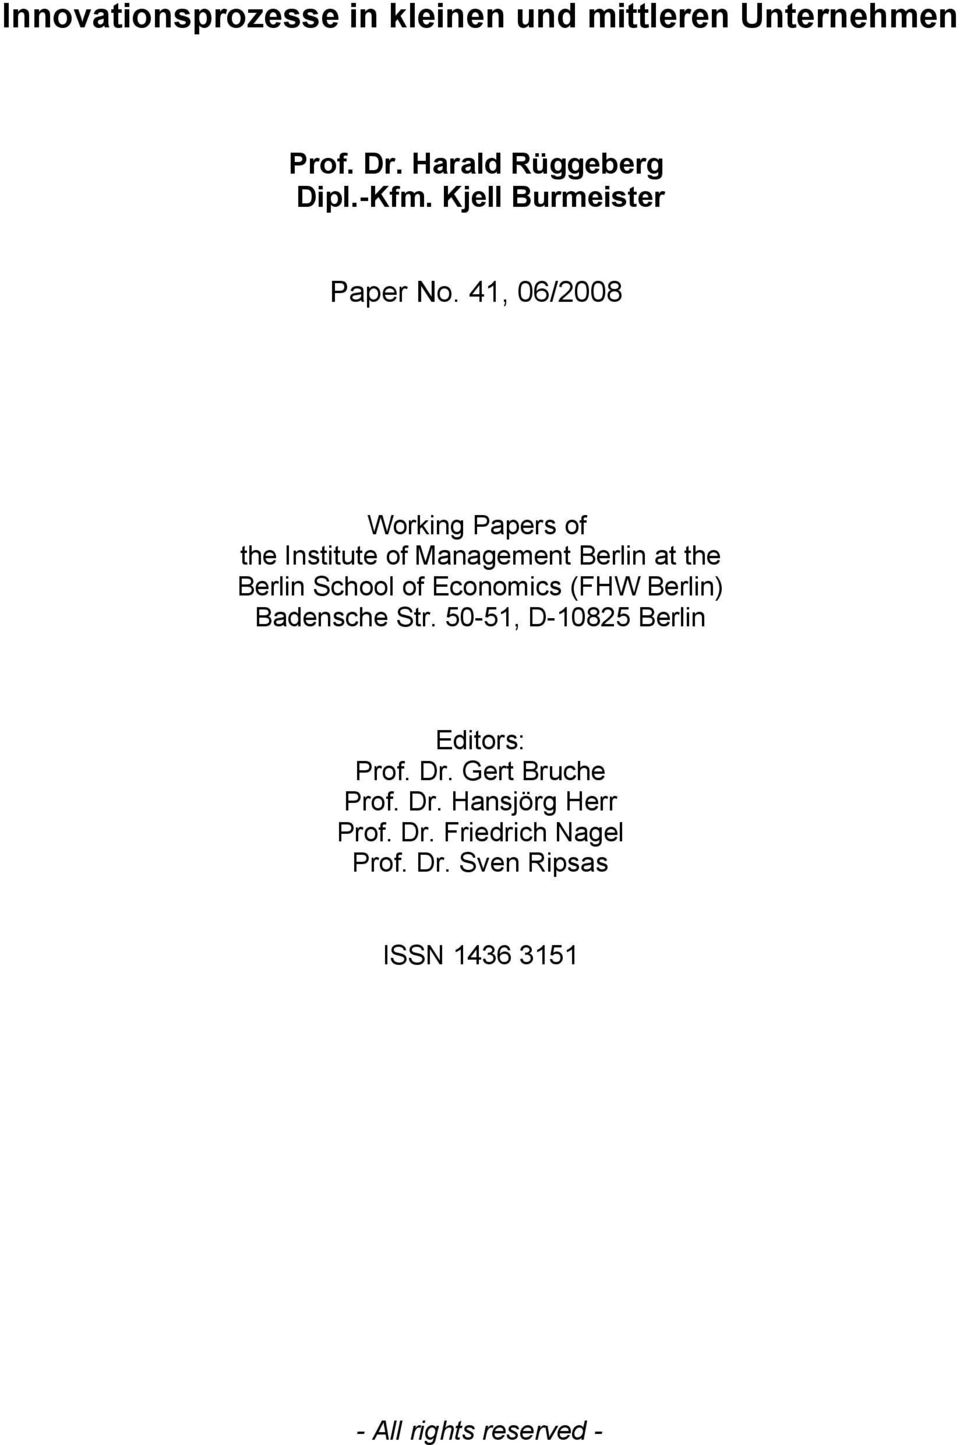 41, 06/2008 Working Papers of the Institute of Management Berlin at the Berlin School of Economics